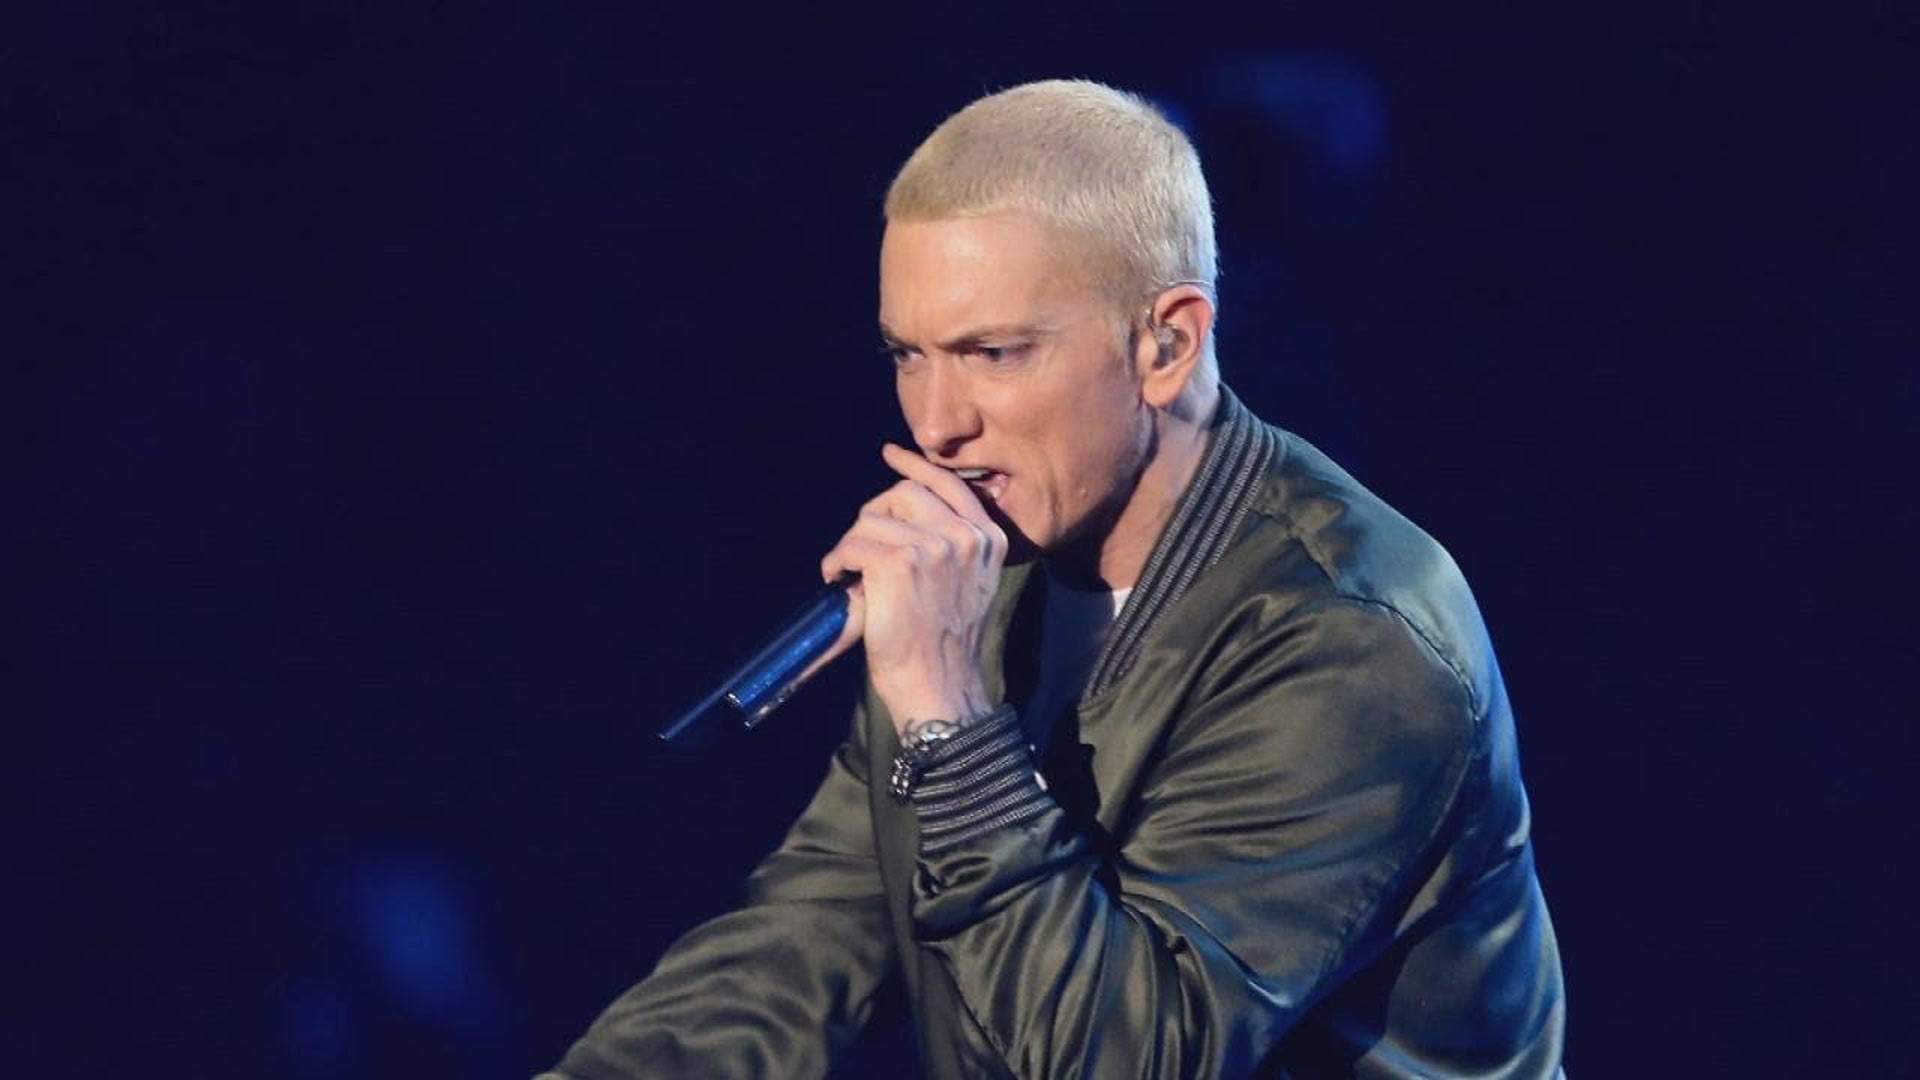 Eminem Is Bringing His Rapture Tour to Australia and New Zealand in Early 2019